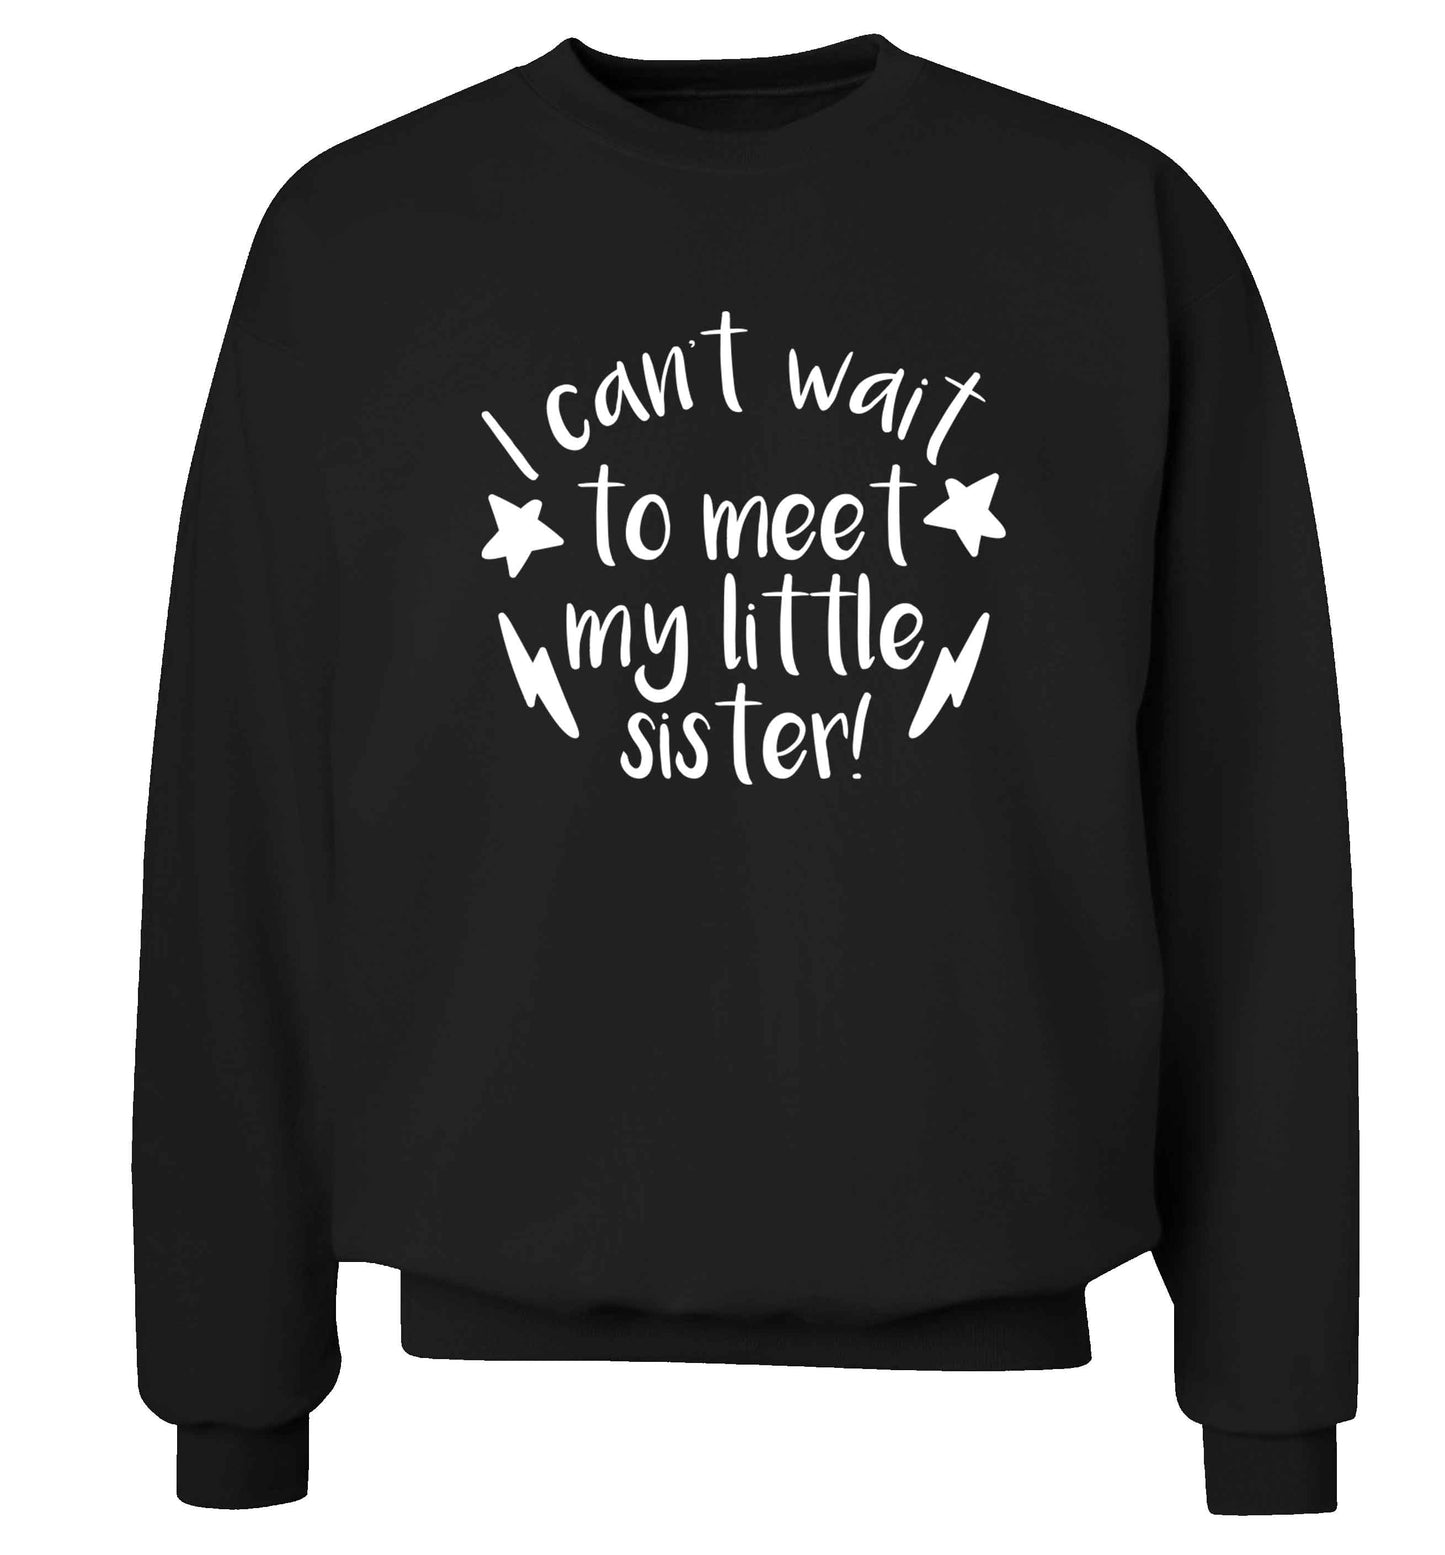 Something special growing inside it's my little sister I can't wait to say hi! Adult's unisex black Sweater 2XL